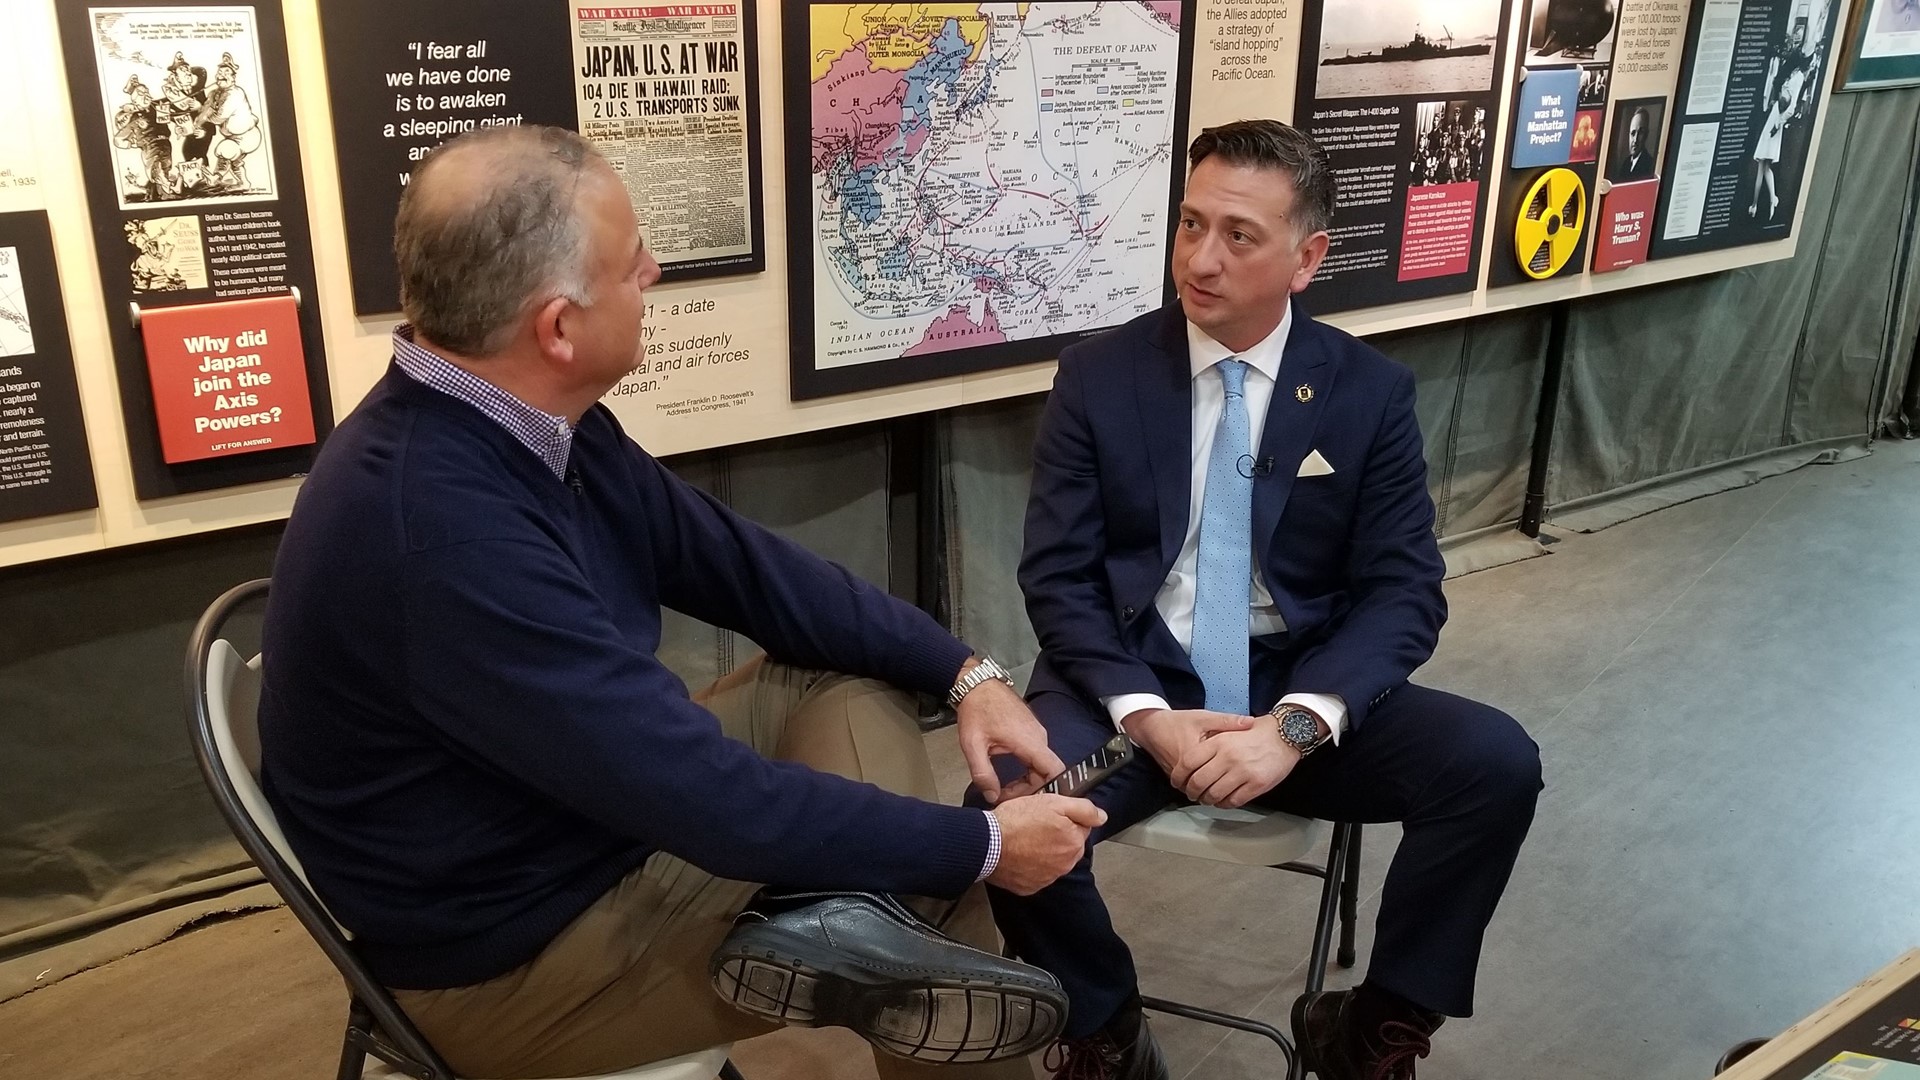 On this episode of Get 2 Know Scott Levin sits down with Army Staff Sargent David Bellavia for a little insight into his past and his future.